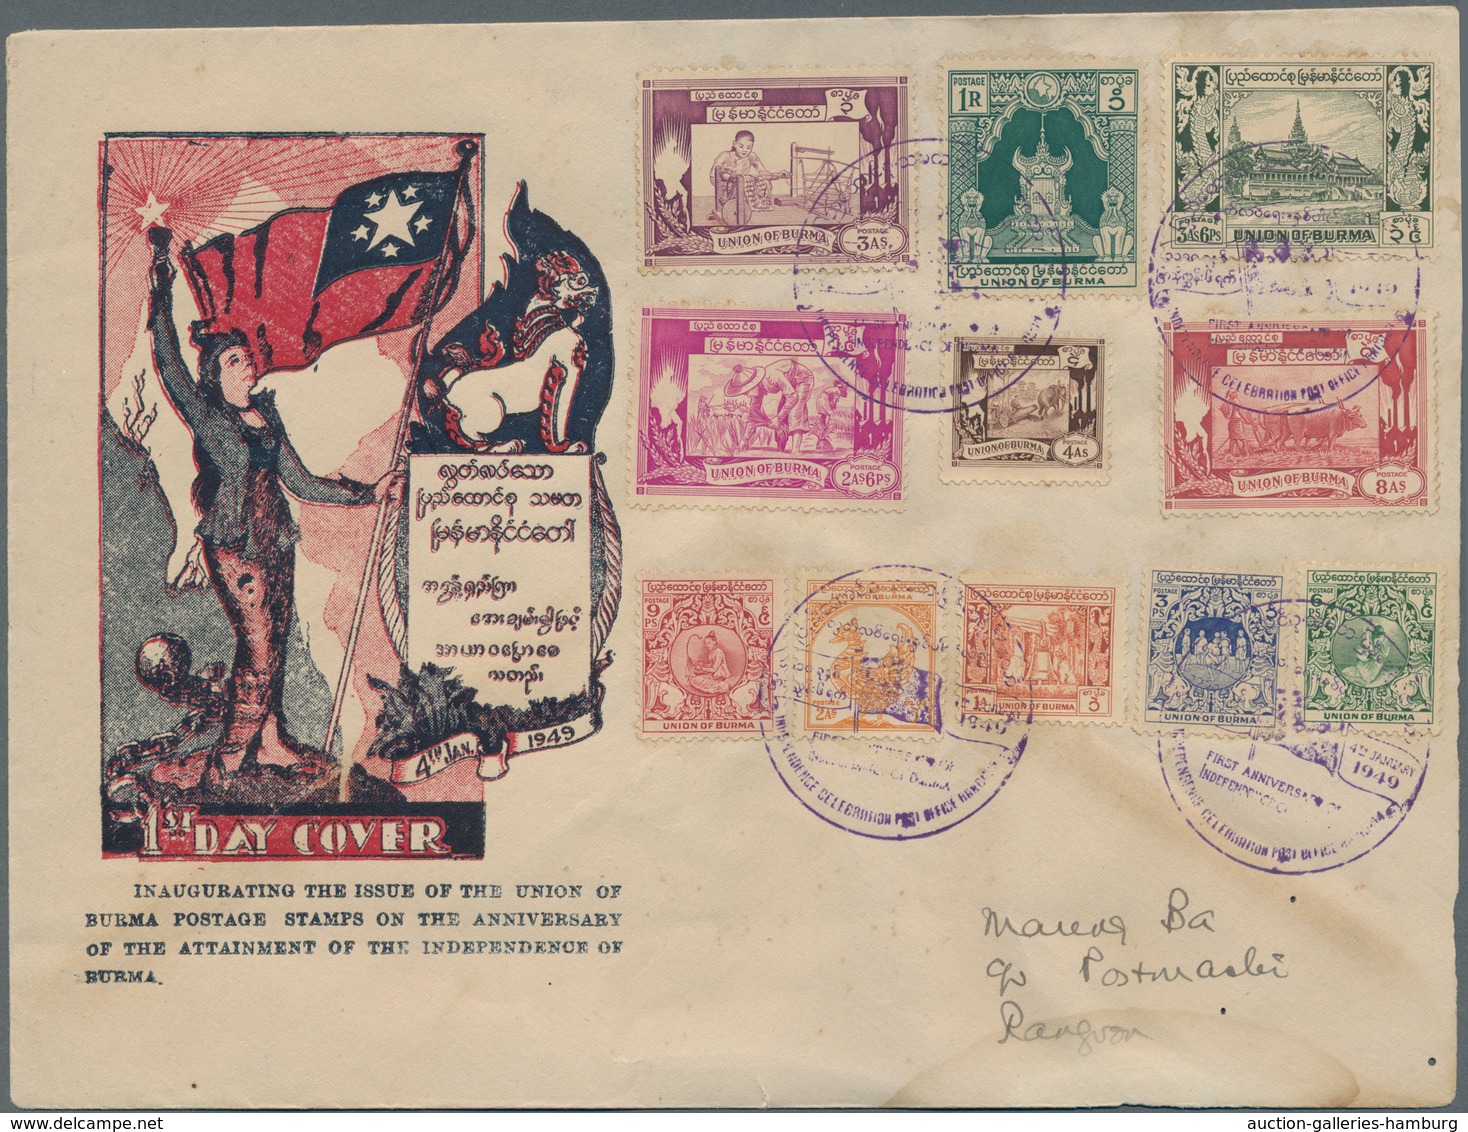 Malaiische Staaten: 1880's-1950's ca.: More than 500 covers, postcards and postal stationery items f